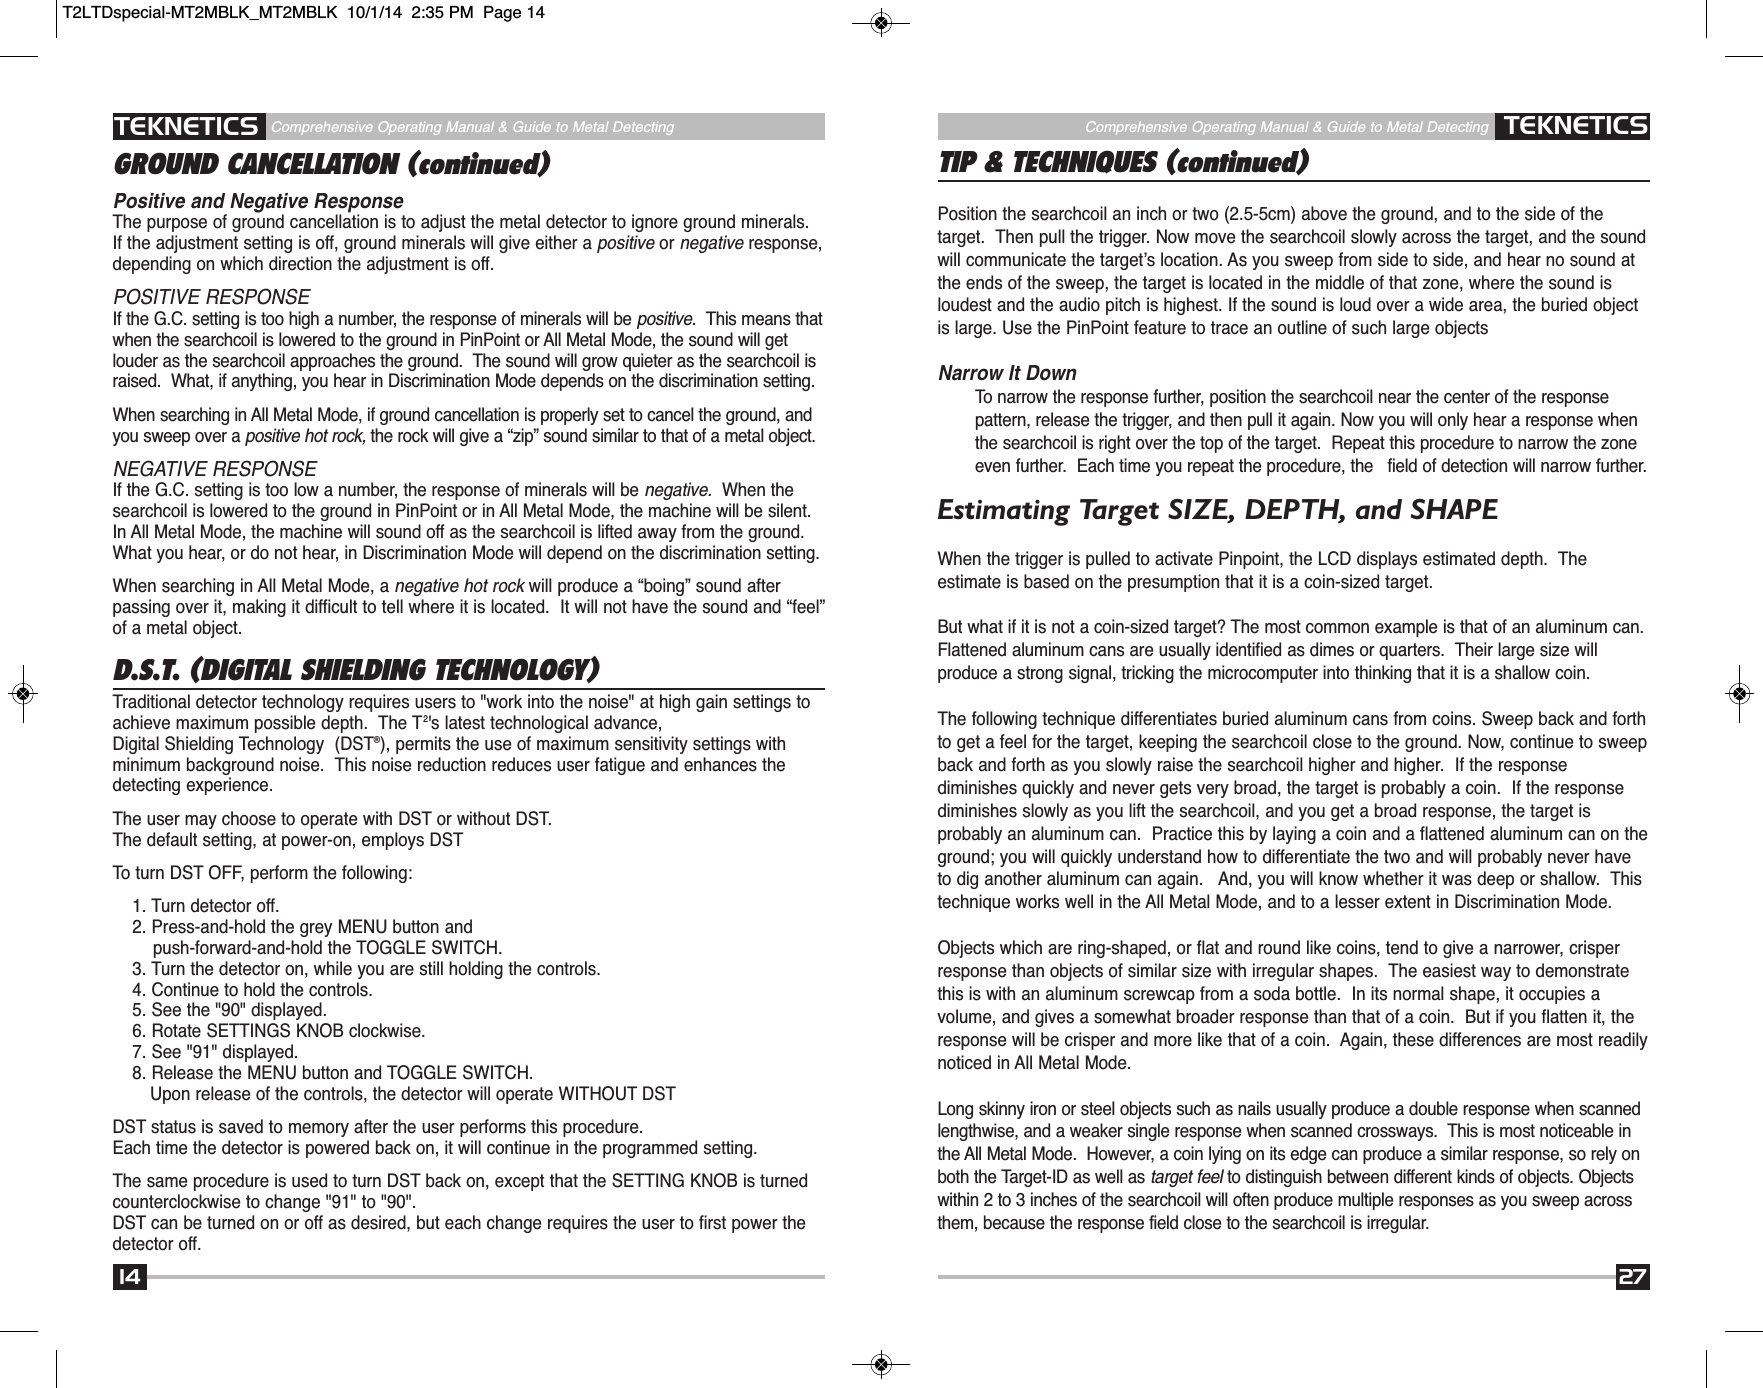 Page 14 of First Texas T2MD Professional Metal Detector User Manual Layout 1